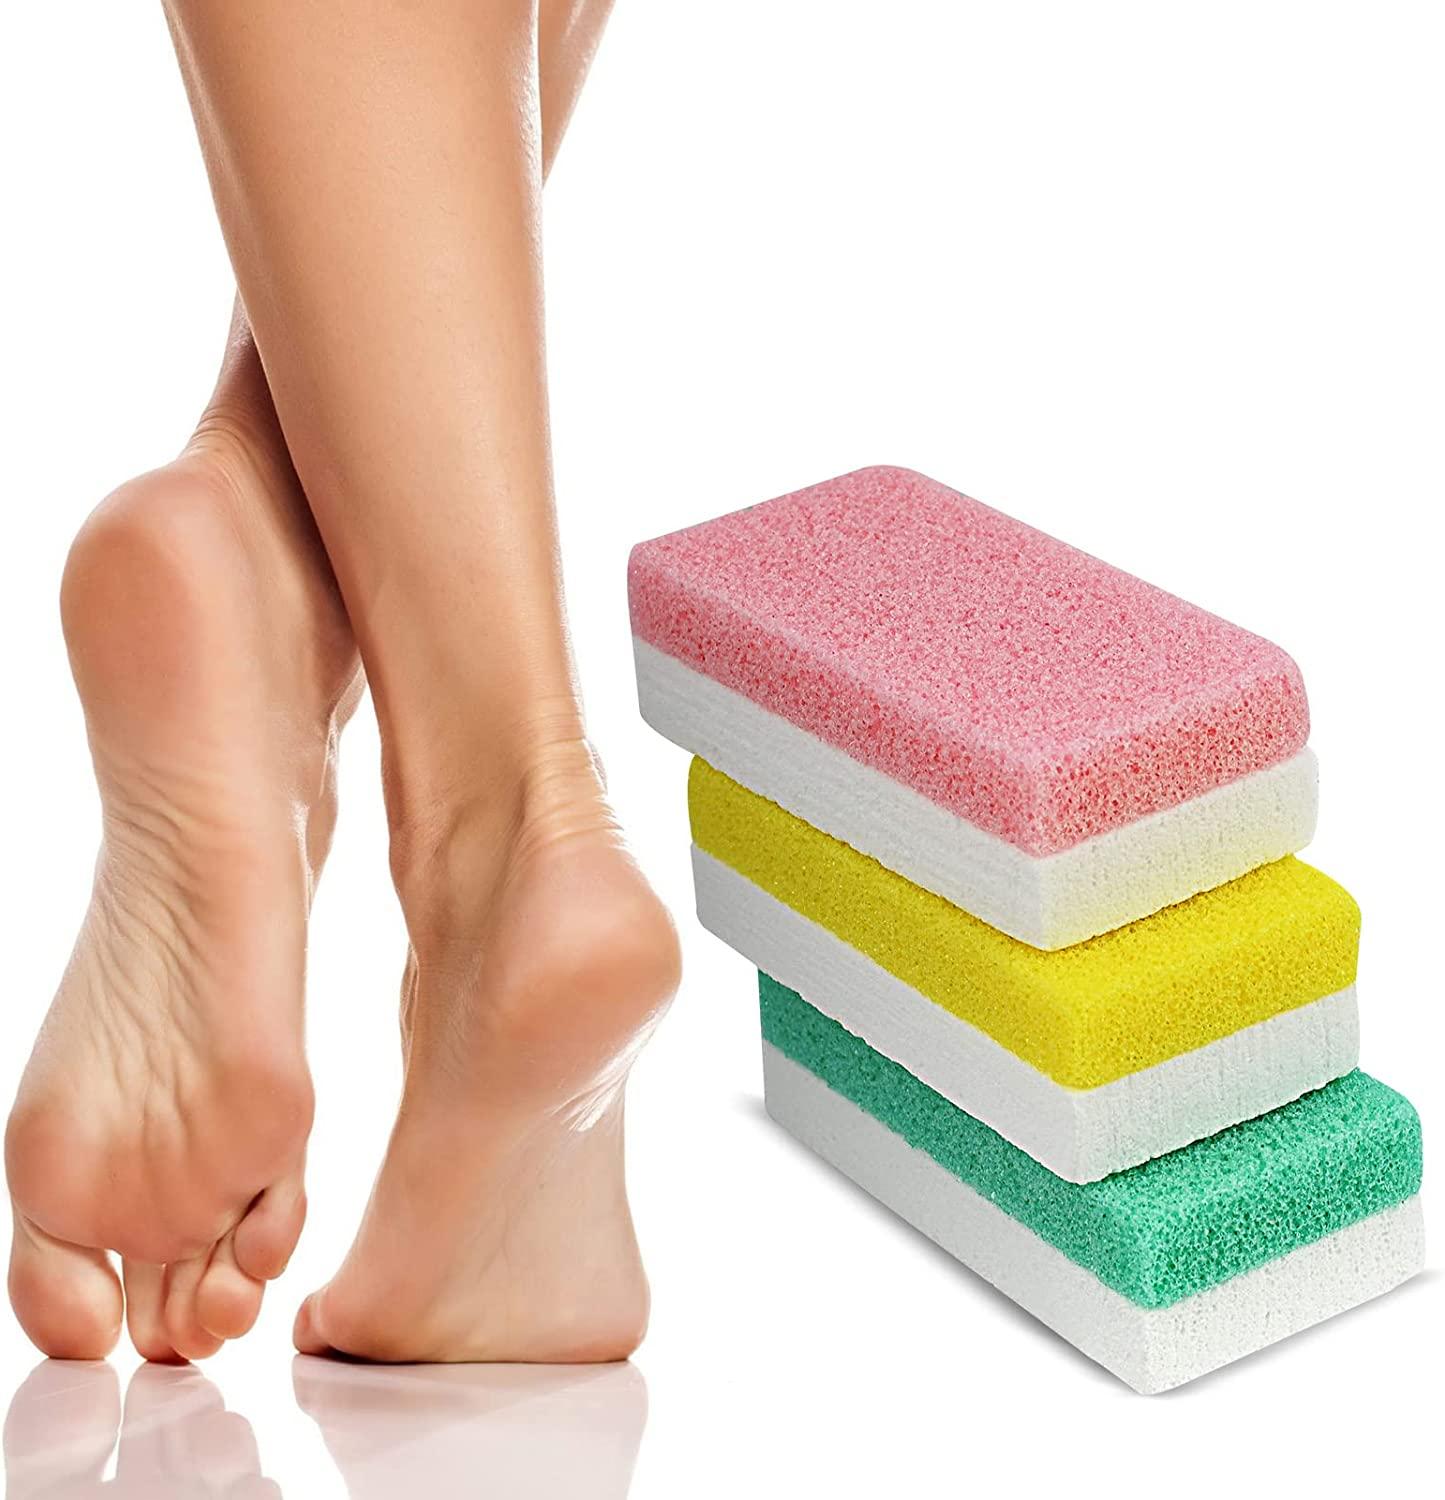 2 in 1 Pumice Stone for Feet,6 Pack Foot Scrubber & Callus Remover, Stone  Scrubber for Hard Skin,Foot Pumice,Dead Skin Remover for Feet, Heels, Hands